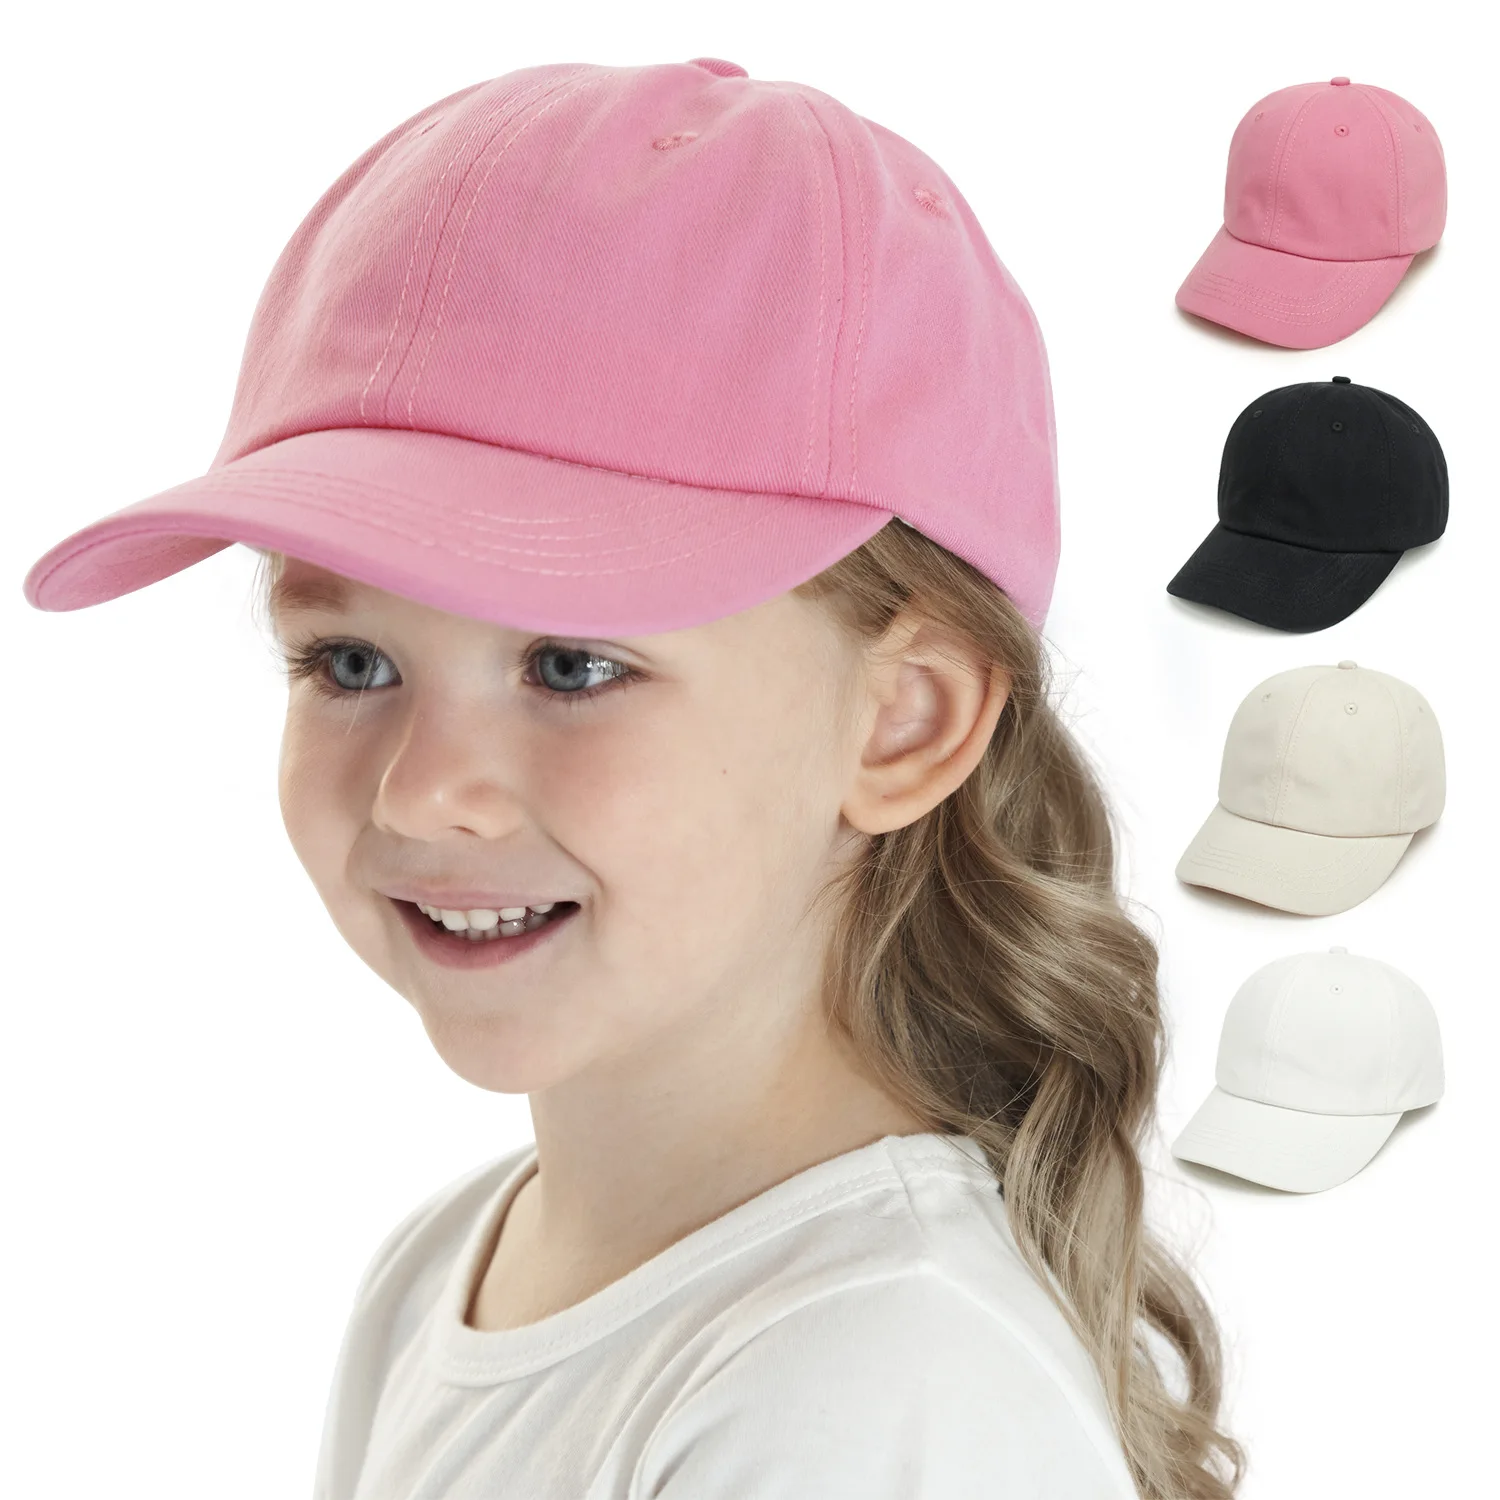 Kids Flat Cap Boys hat Toddler Childs Hat different colours and sizes available 